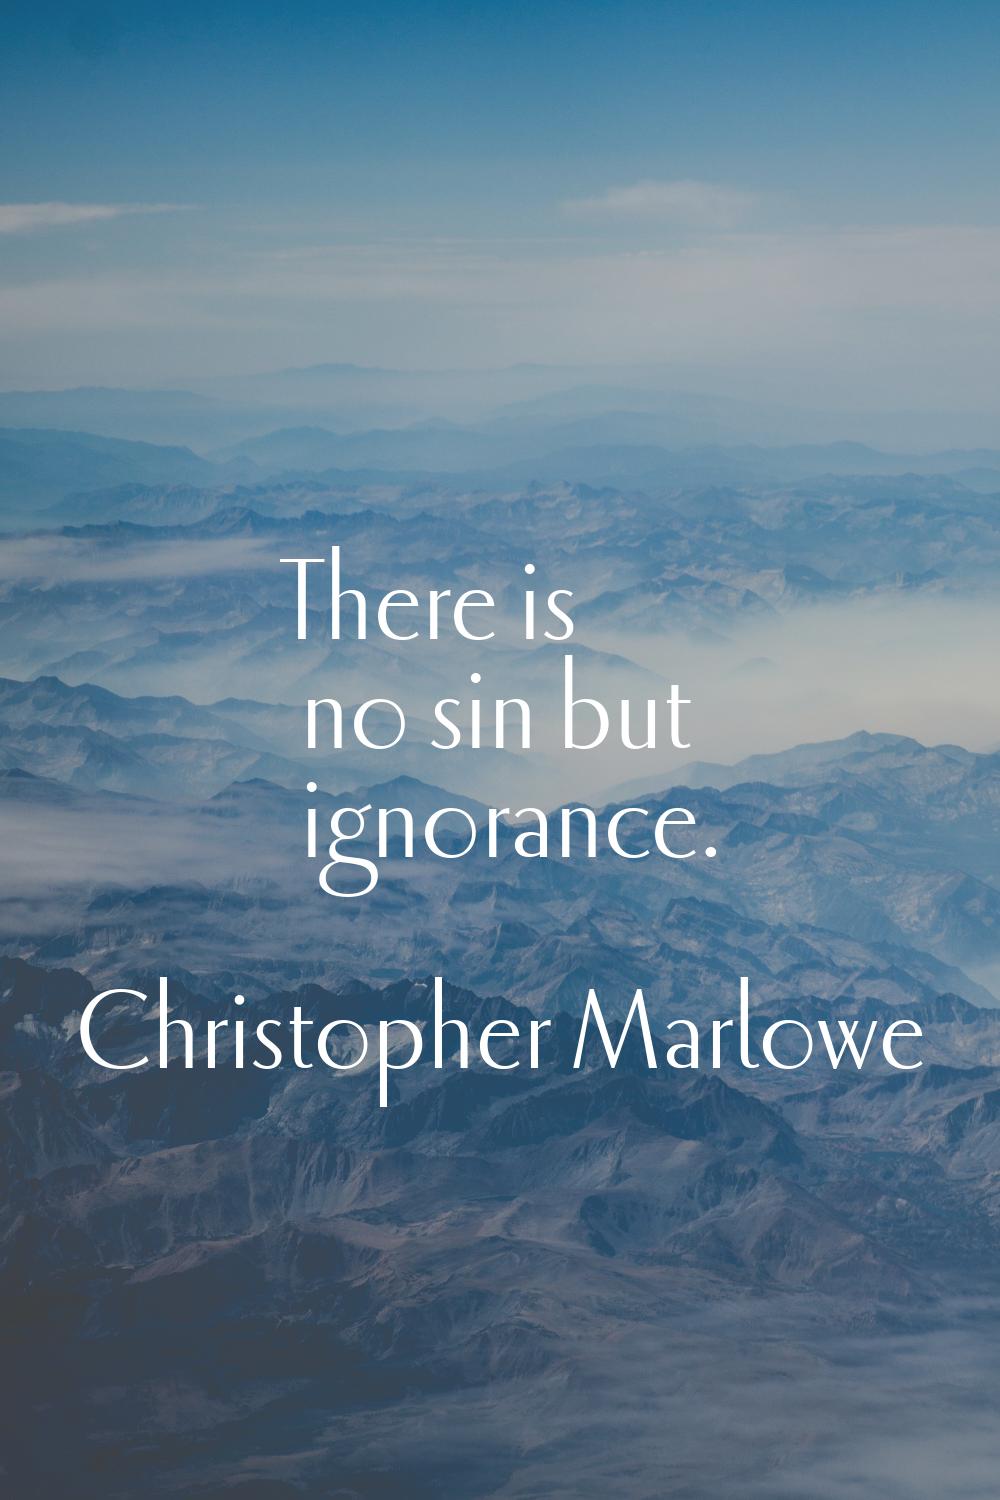 There is no sin but ignorance.